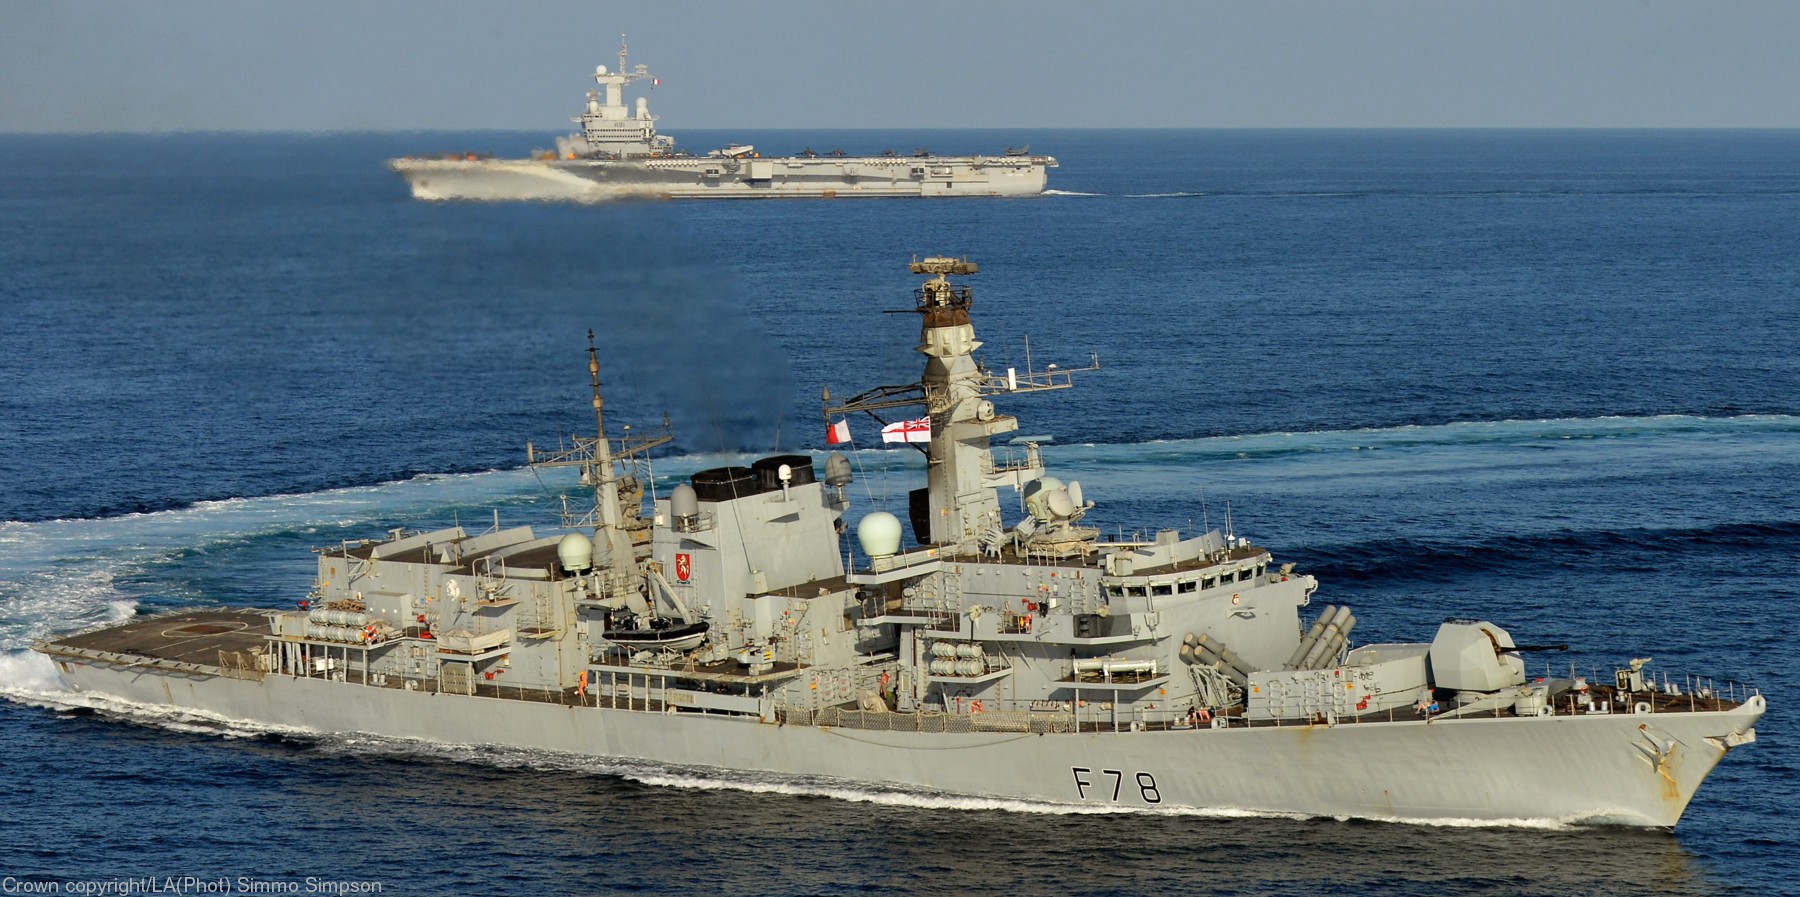 UK deploys second warship in Gulf amid tensions with Iran